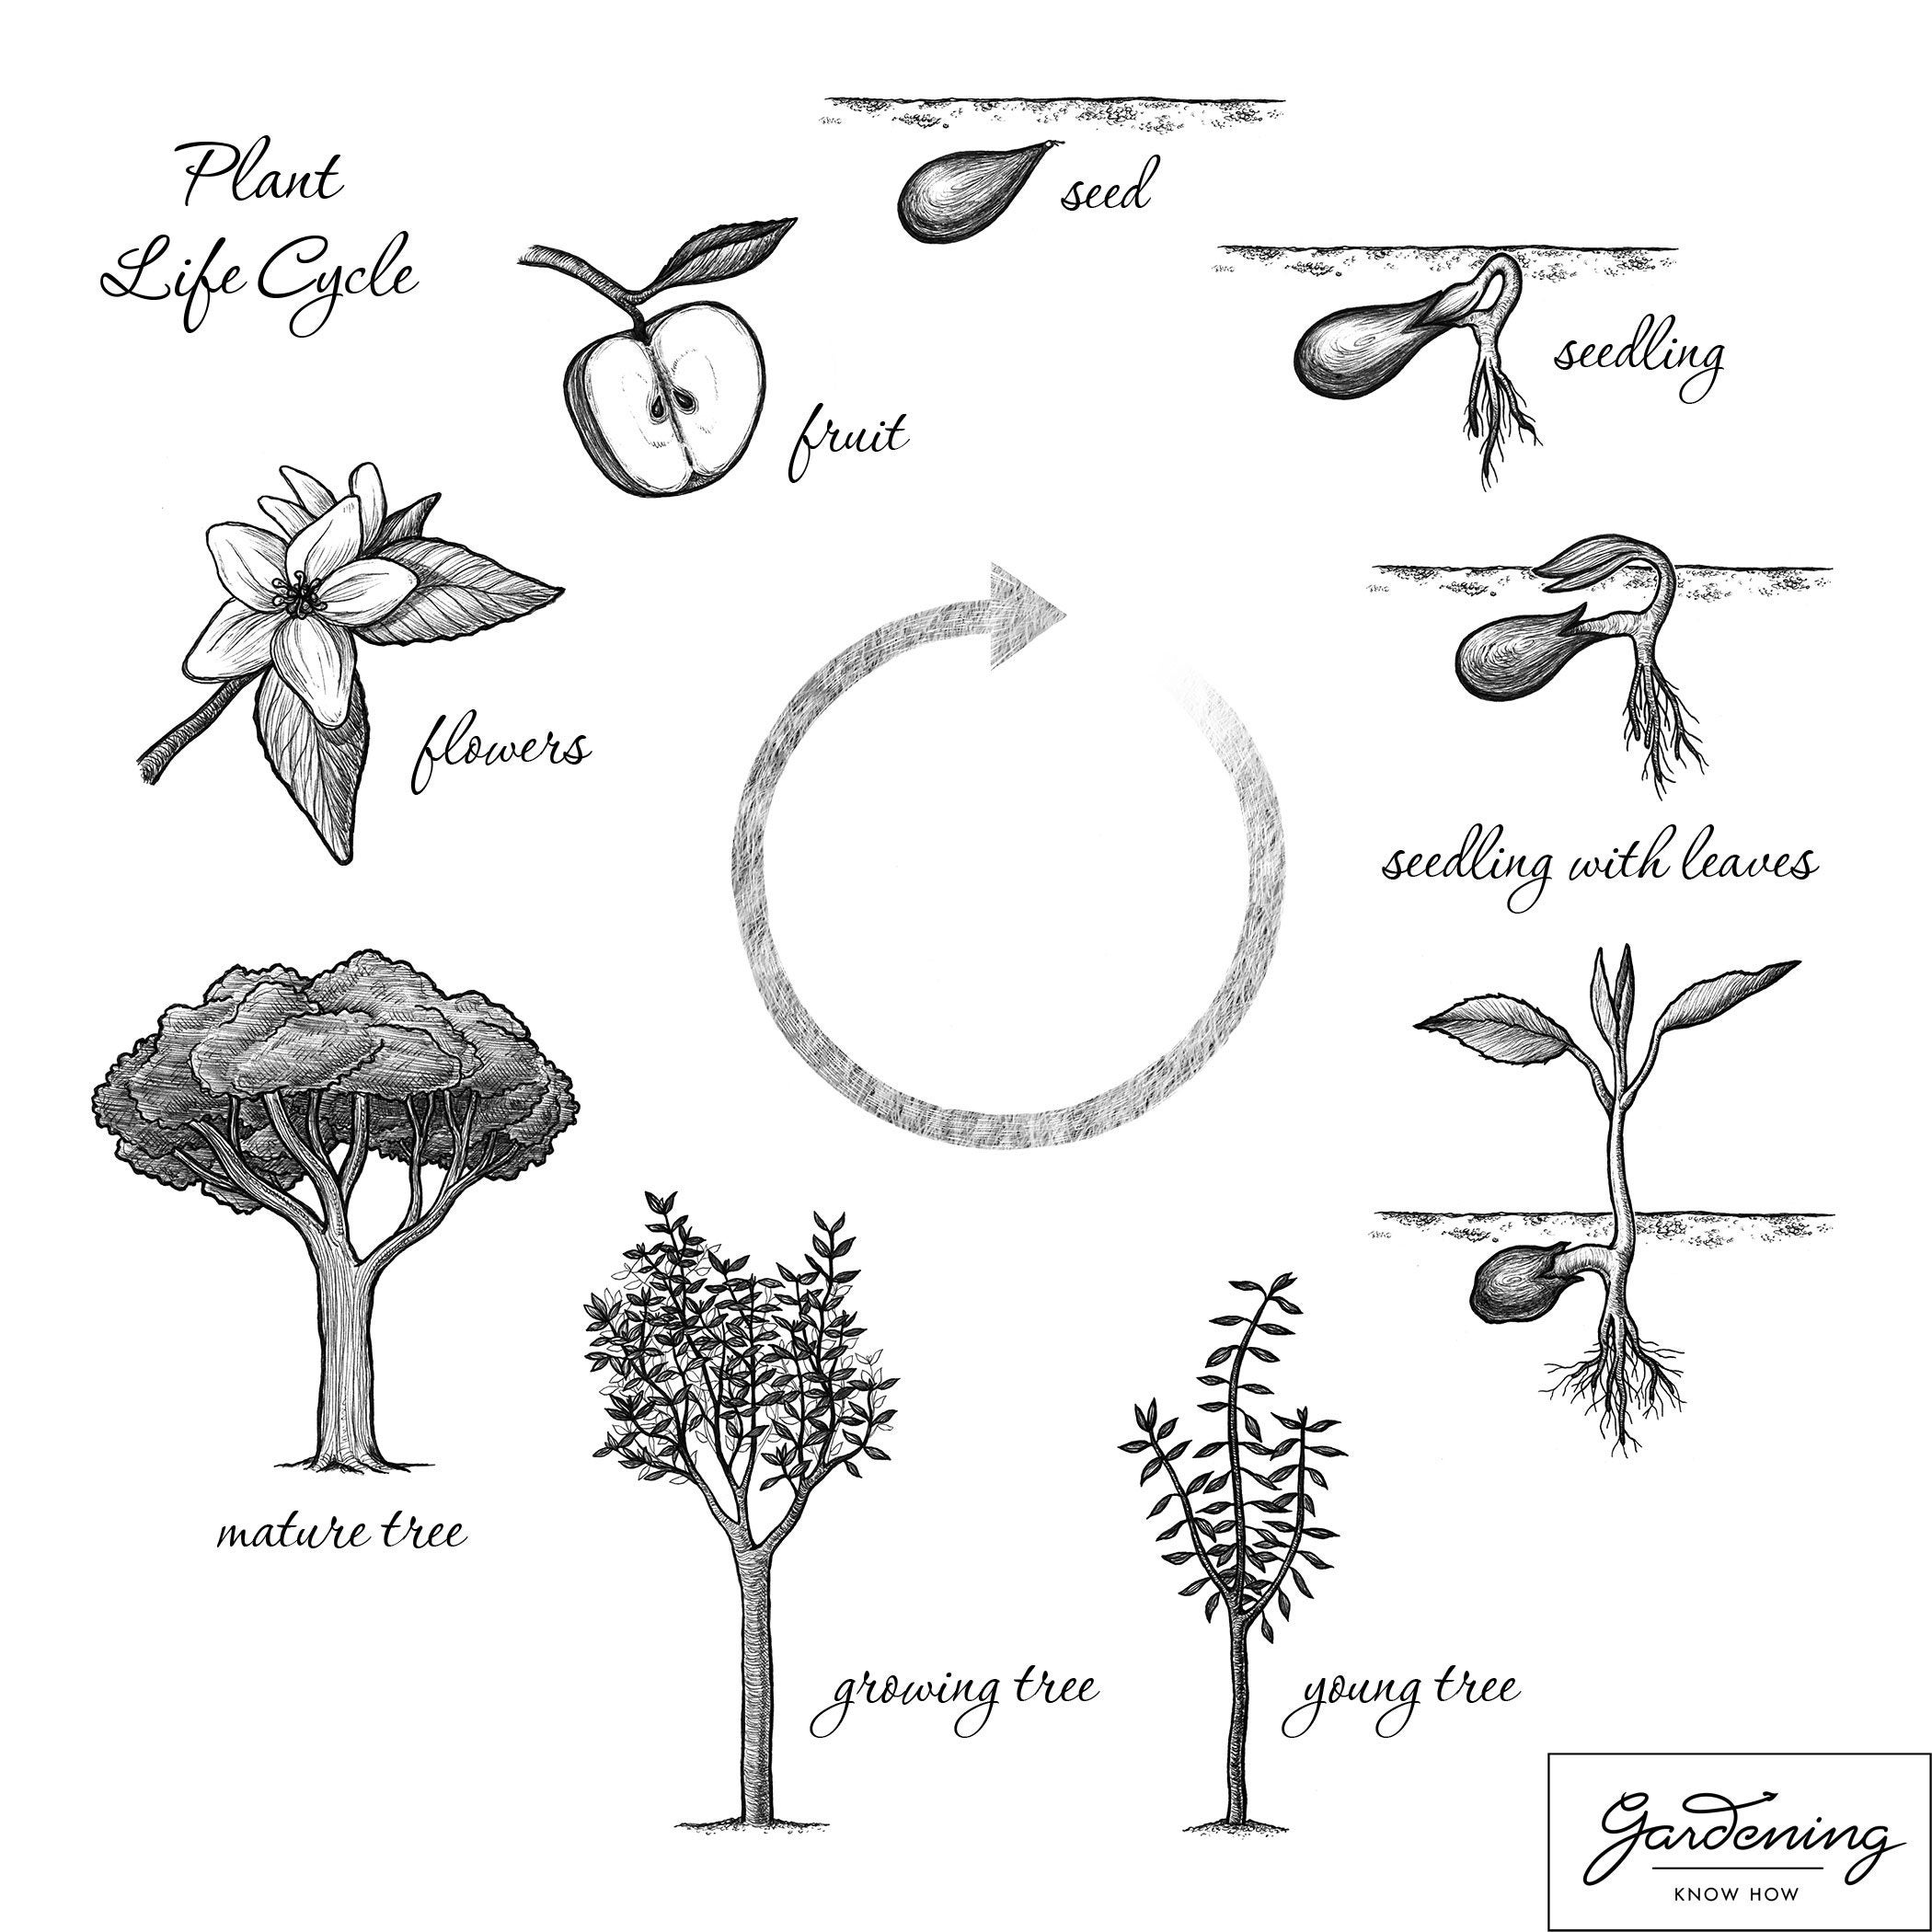 Life Cycle Of A Flowering Plant